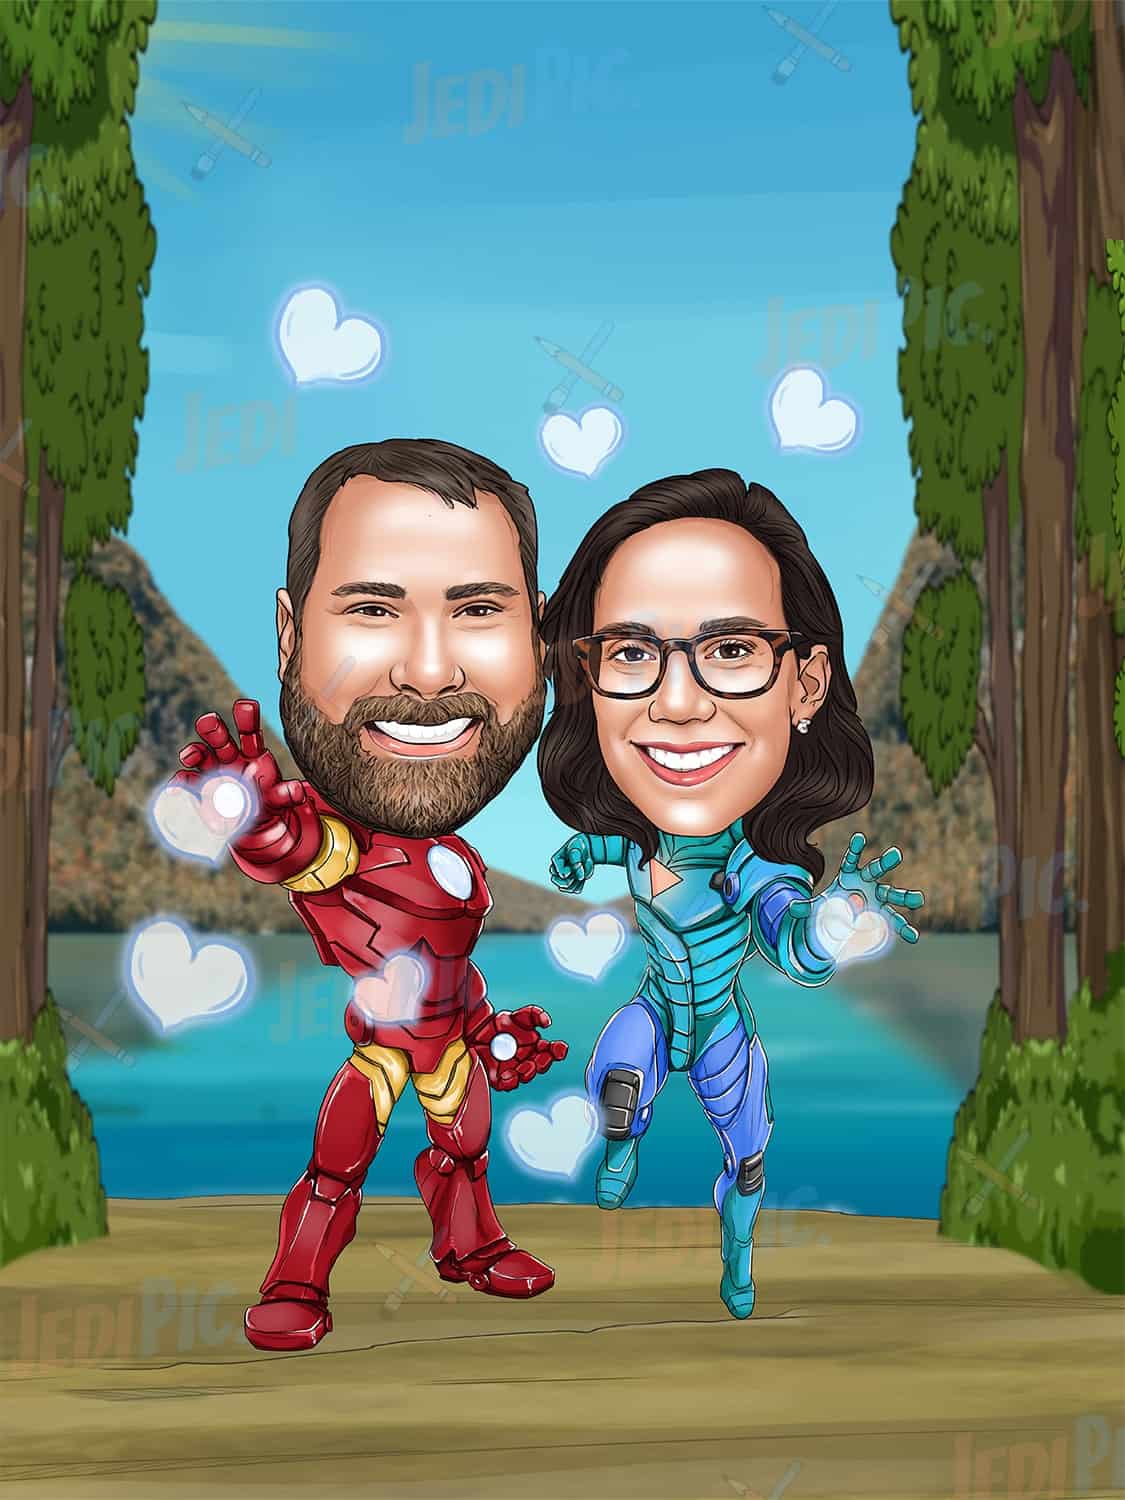 Custom Valentine's Day Couple Cartoon Portrait in Colored Style